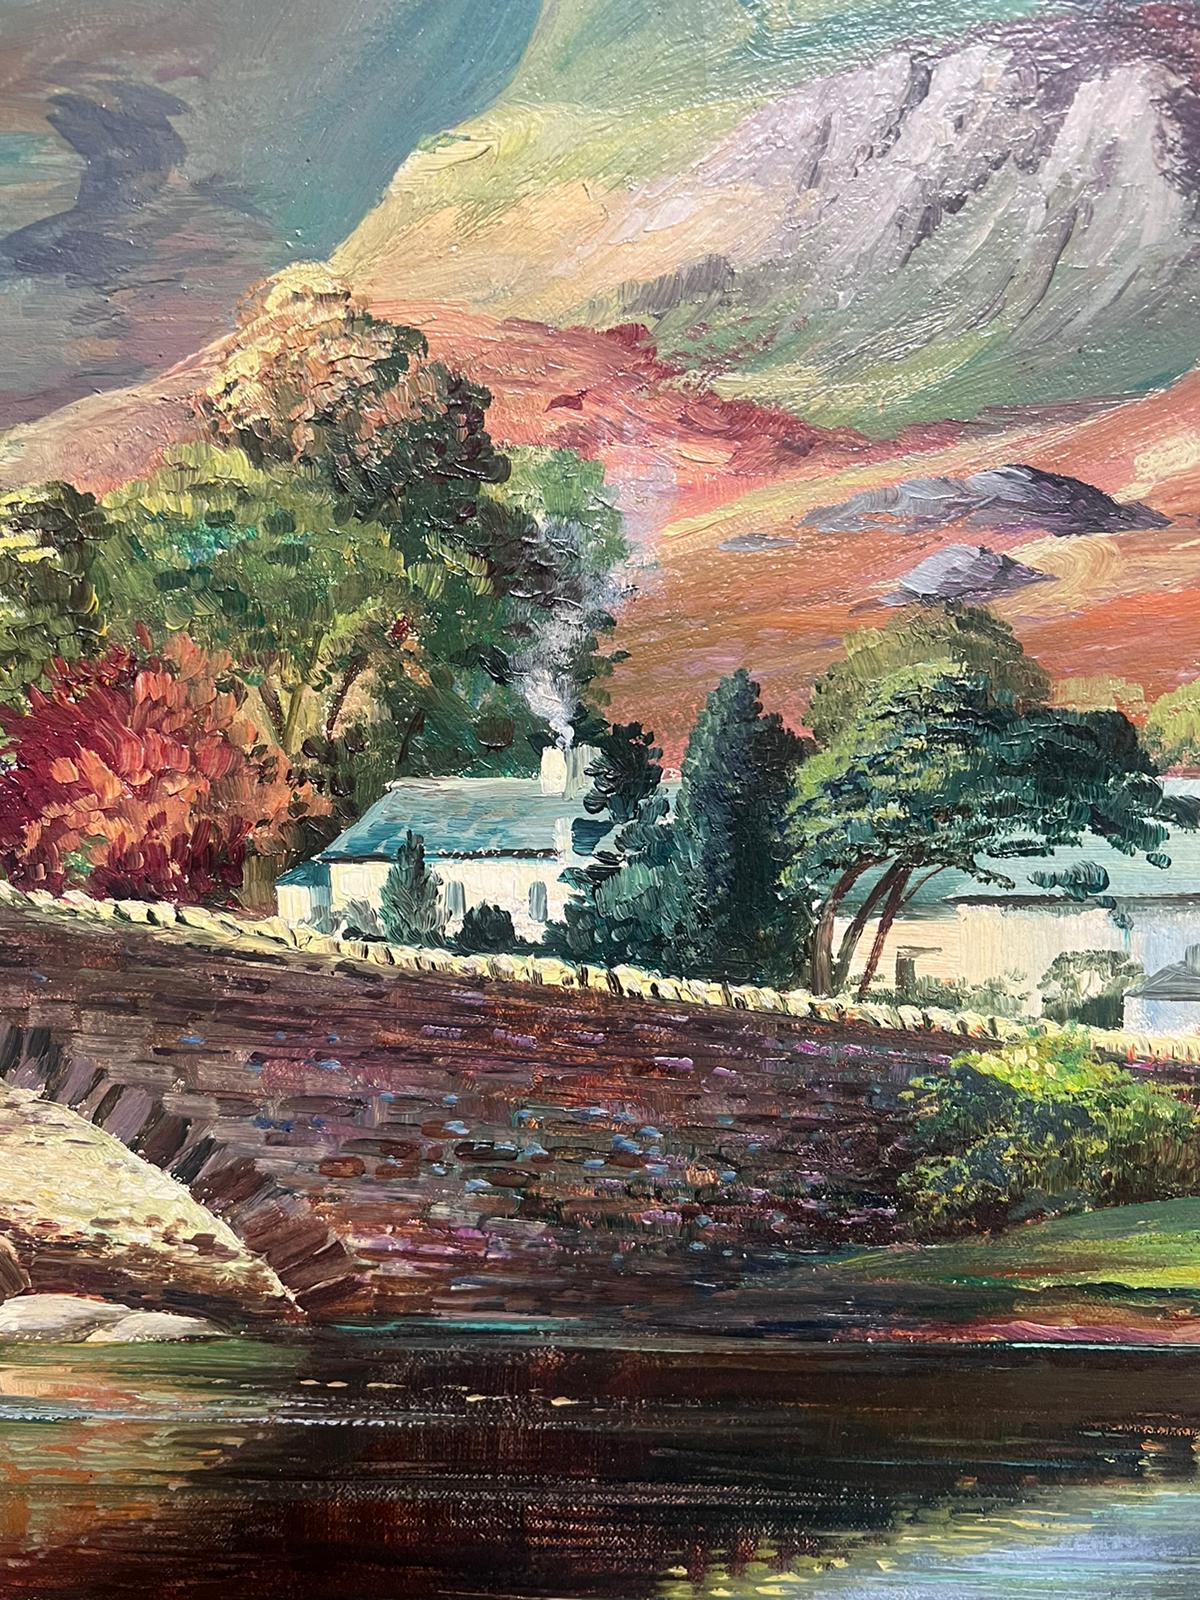 Borrowdale
by Alan. B . Charlton (British, 20th century)
oil on canvas, framed
framed: 23 x 33 inches
canvas: 20 x 30 inches
inscribed verso
provenance: private collection
condition: very good and sound condition 

Borrowdale is a picturesque valley